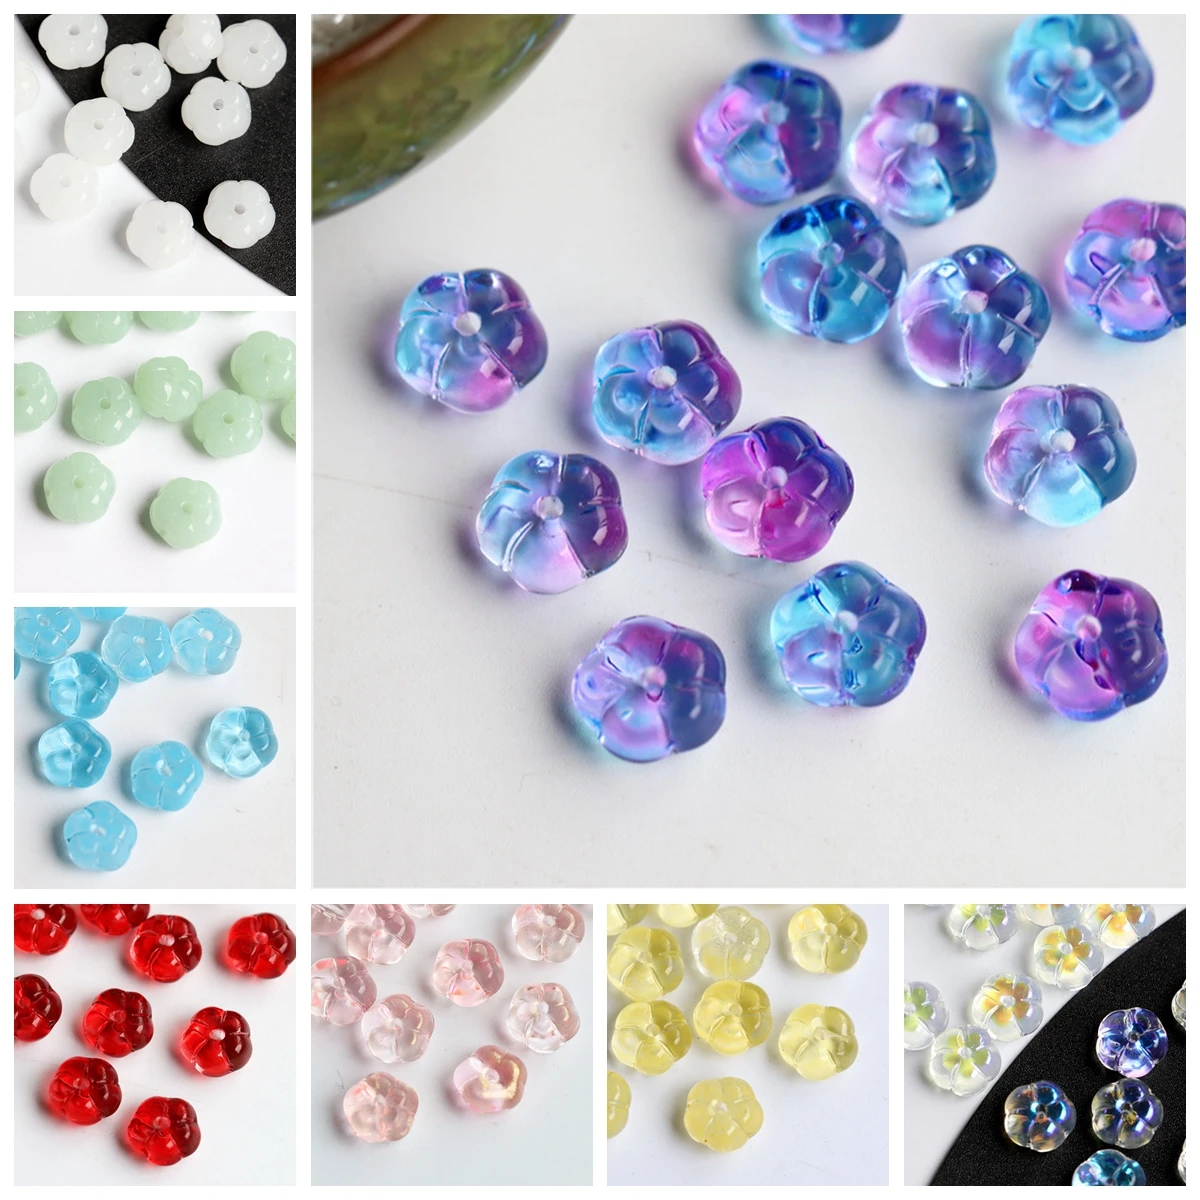 10pcs 9.5mm Flat Round Flower Pumpkin Shape Crystal Lampwork Glass Loose Beads for Jewelry Making 1pcs auspicious sign flat round shape 26mm handmade lampwork glass loose beads for jewelry making diy crafts findings